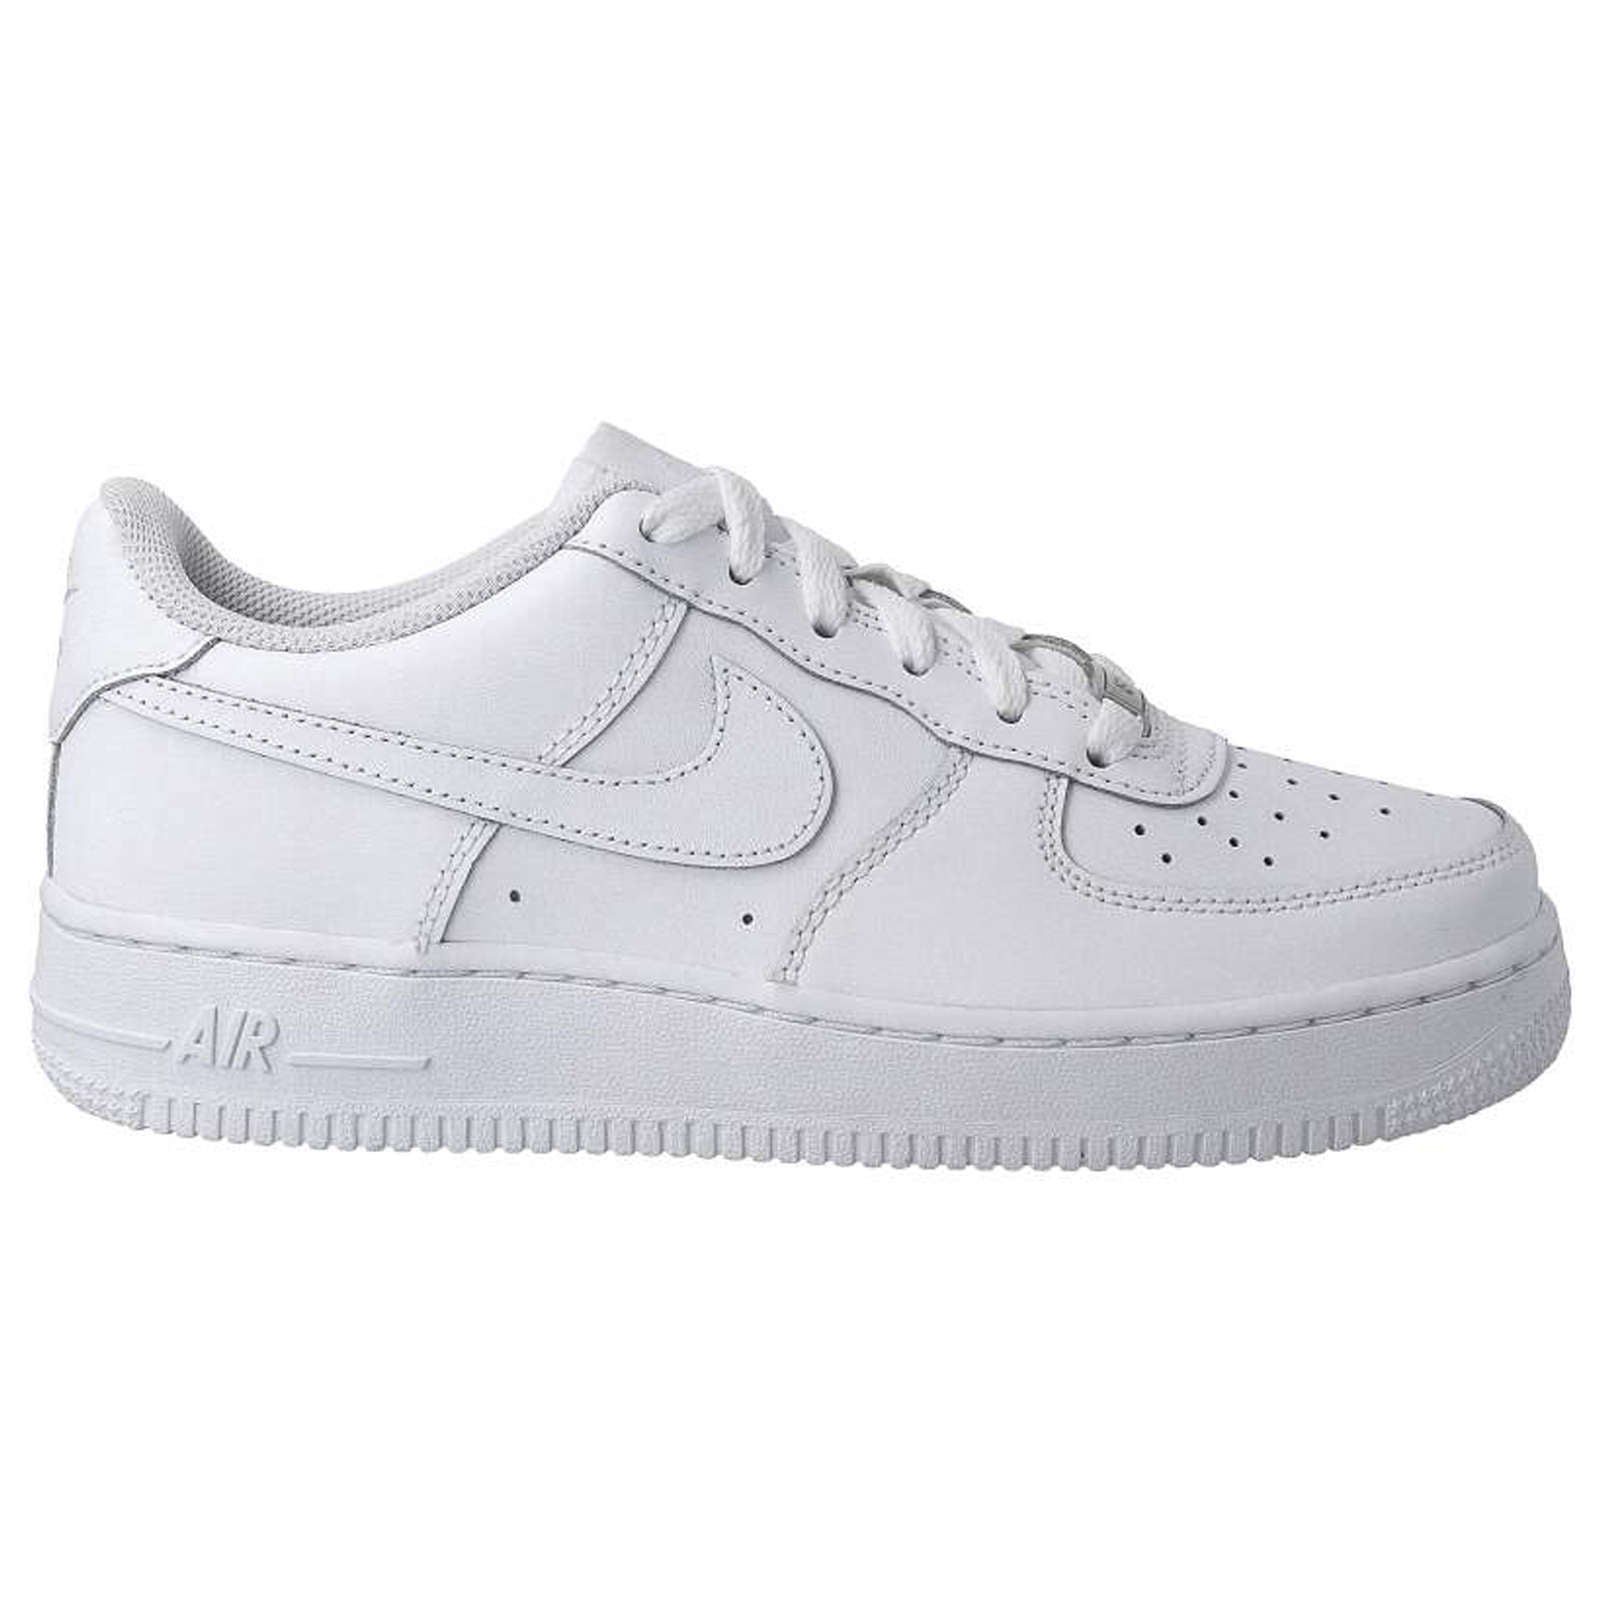 Nike Air Force 1 Le Gs Leather Youth Low Top Trainers